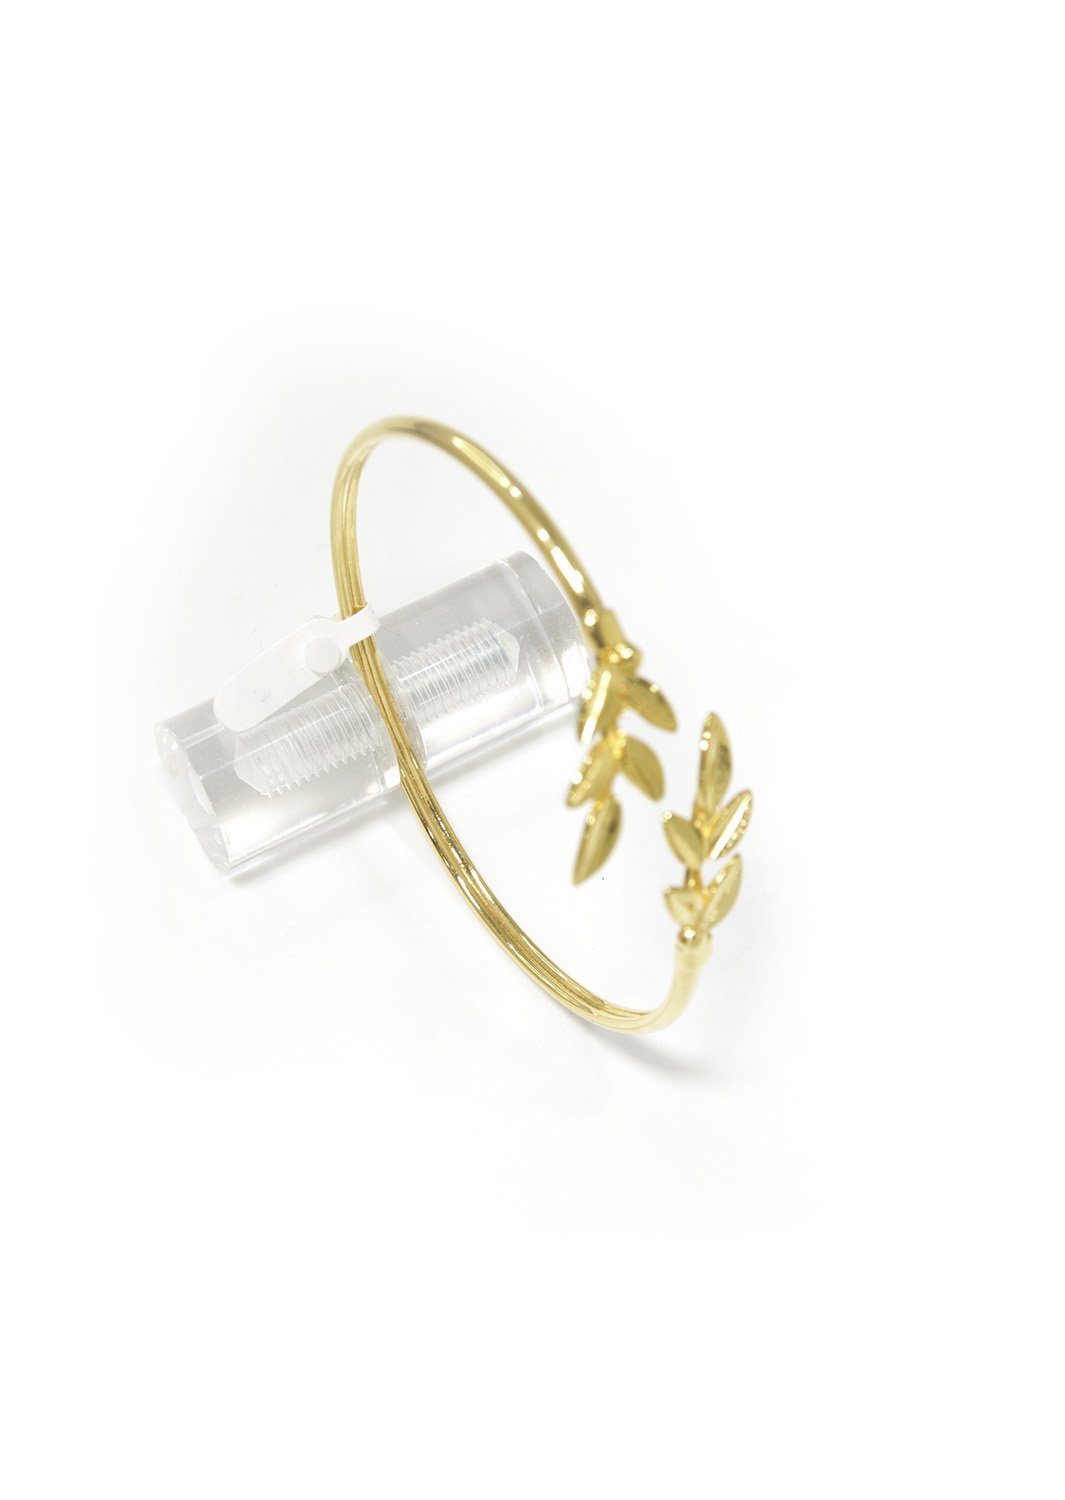 Olive branches gold plated silver cuff bracelet